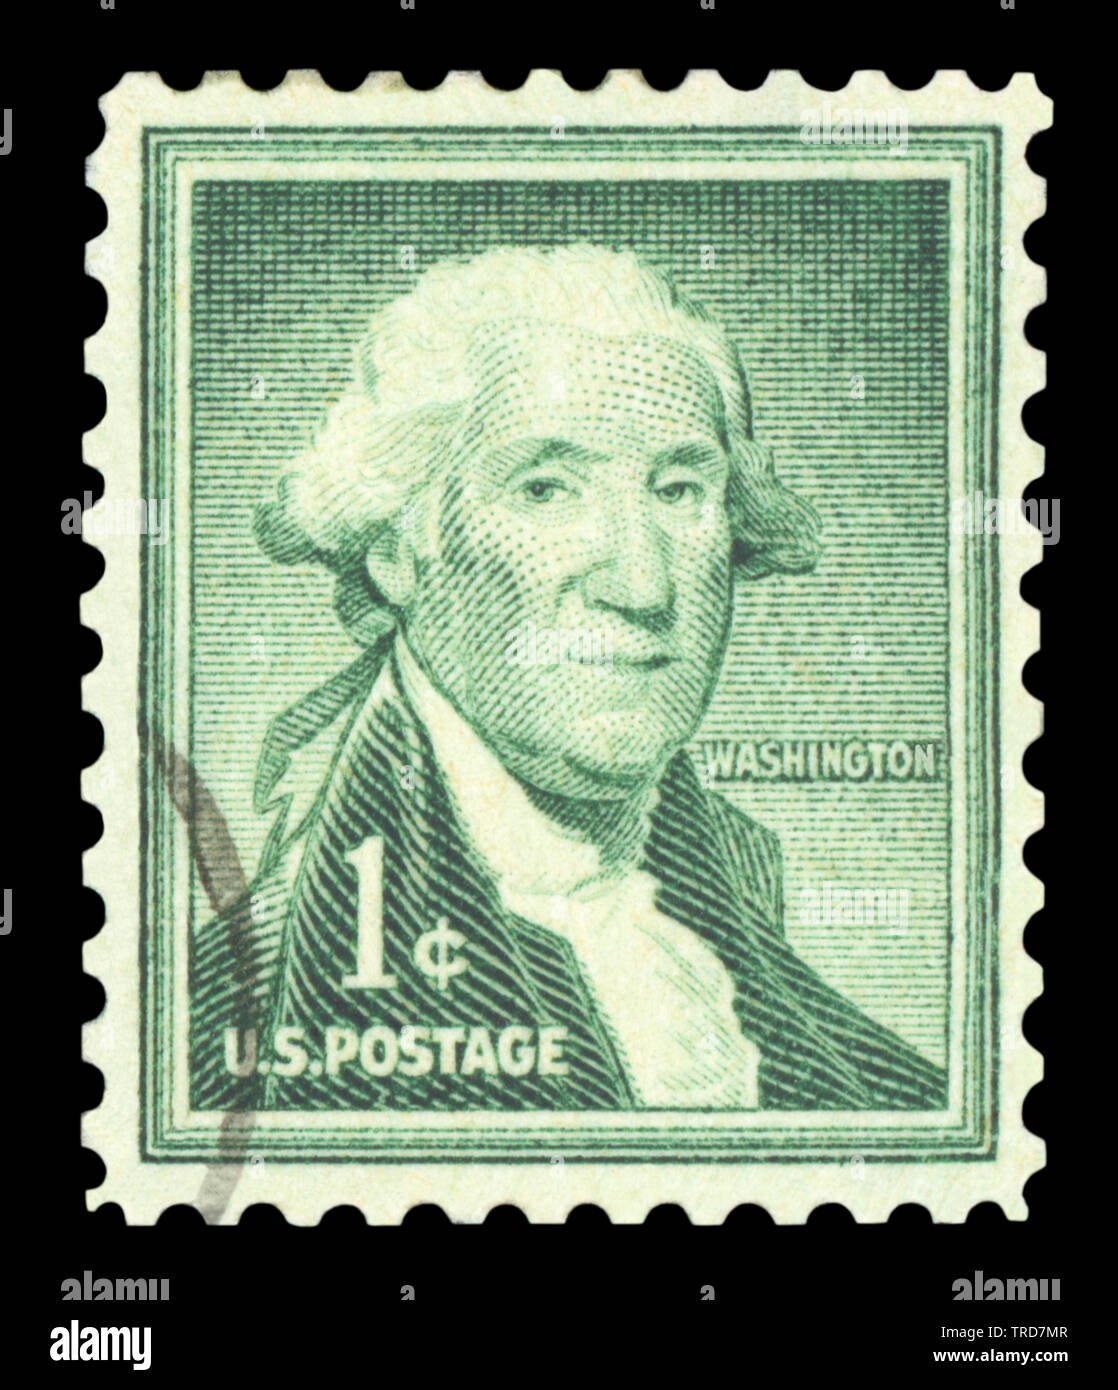 UNITED STATES OF AMERICA - CIRCA 1954: post stamp printed in US (USA) shows 1st president George Washington; liberty issue; Scott 1031 A478 1c green; Stock Photo